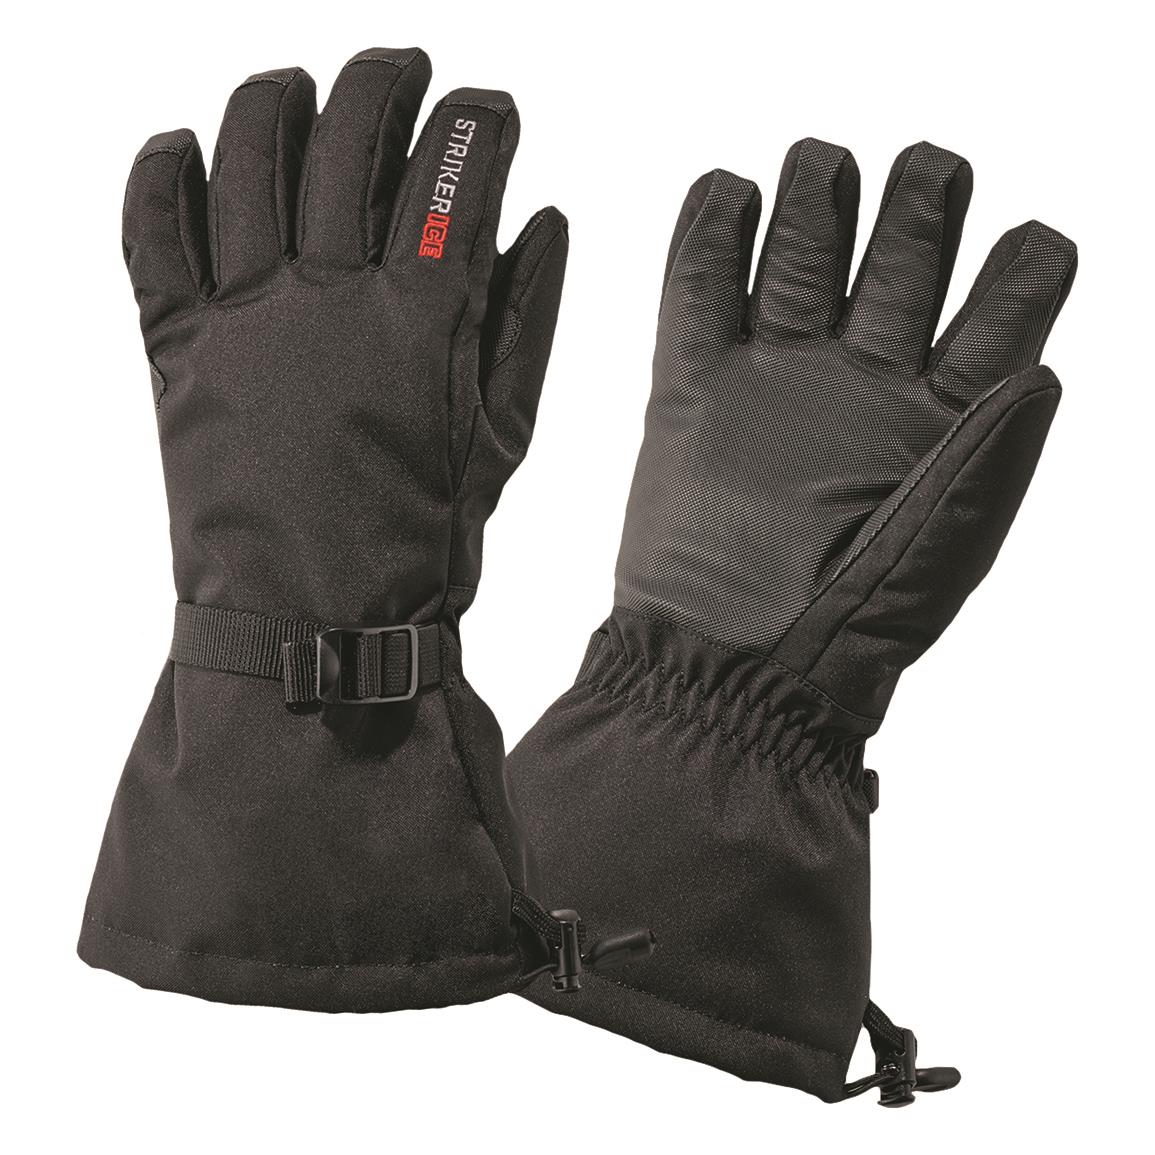 StrikerICE Youth Climate Waterproof Insulated Gloves, Black